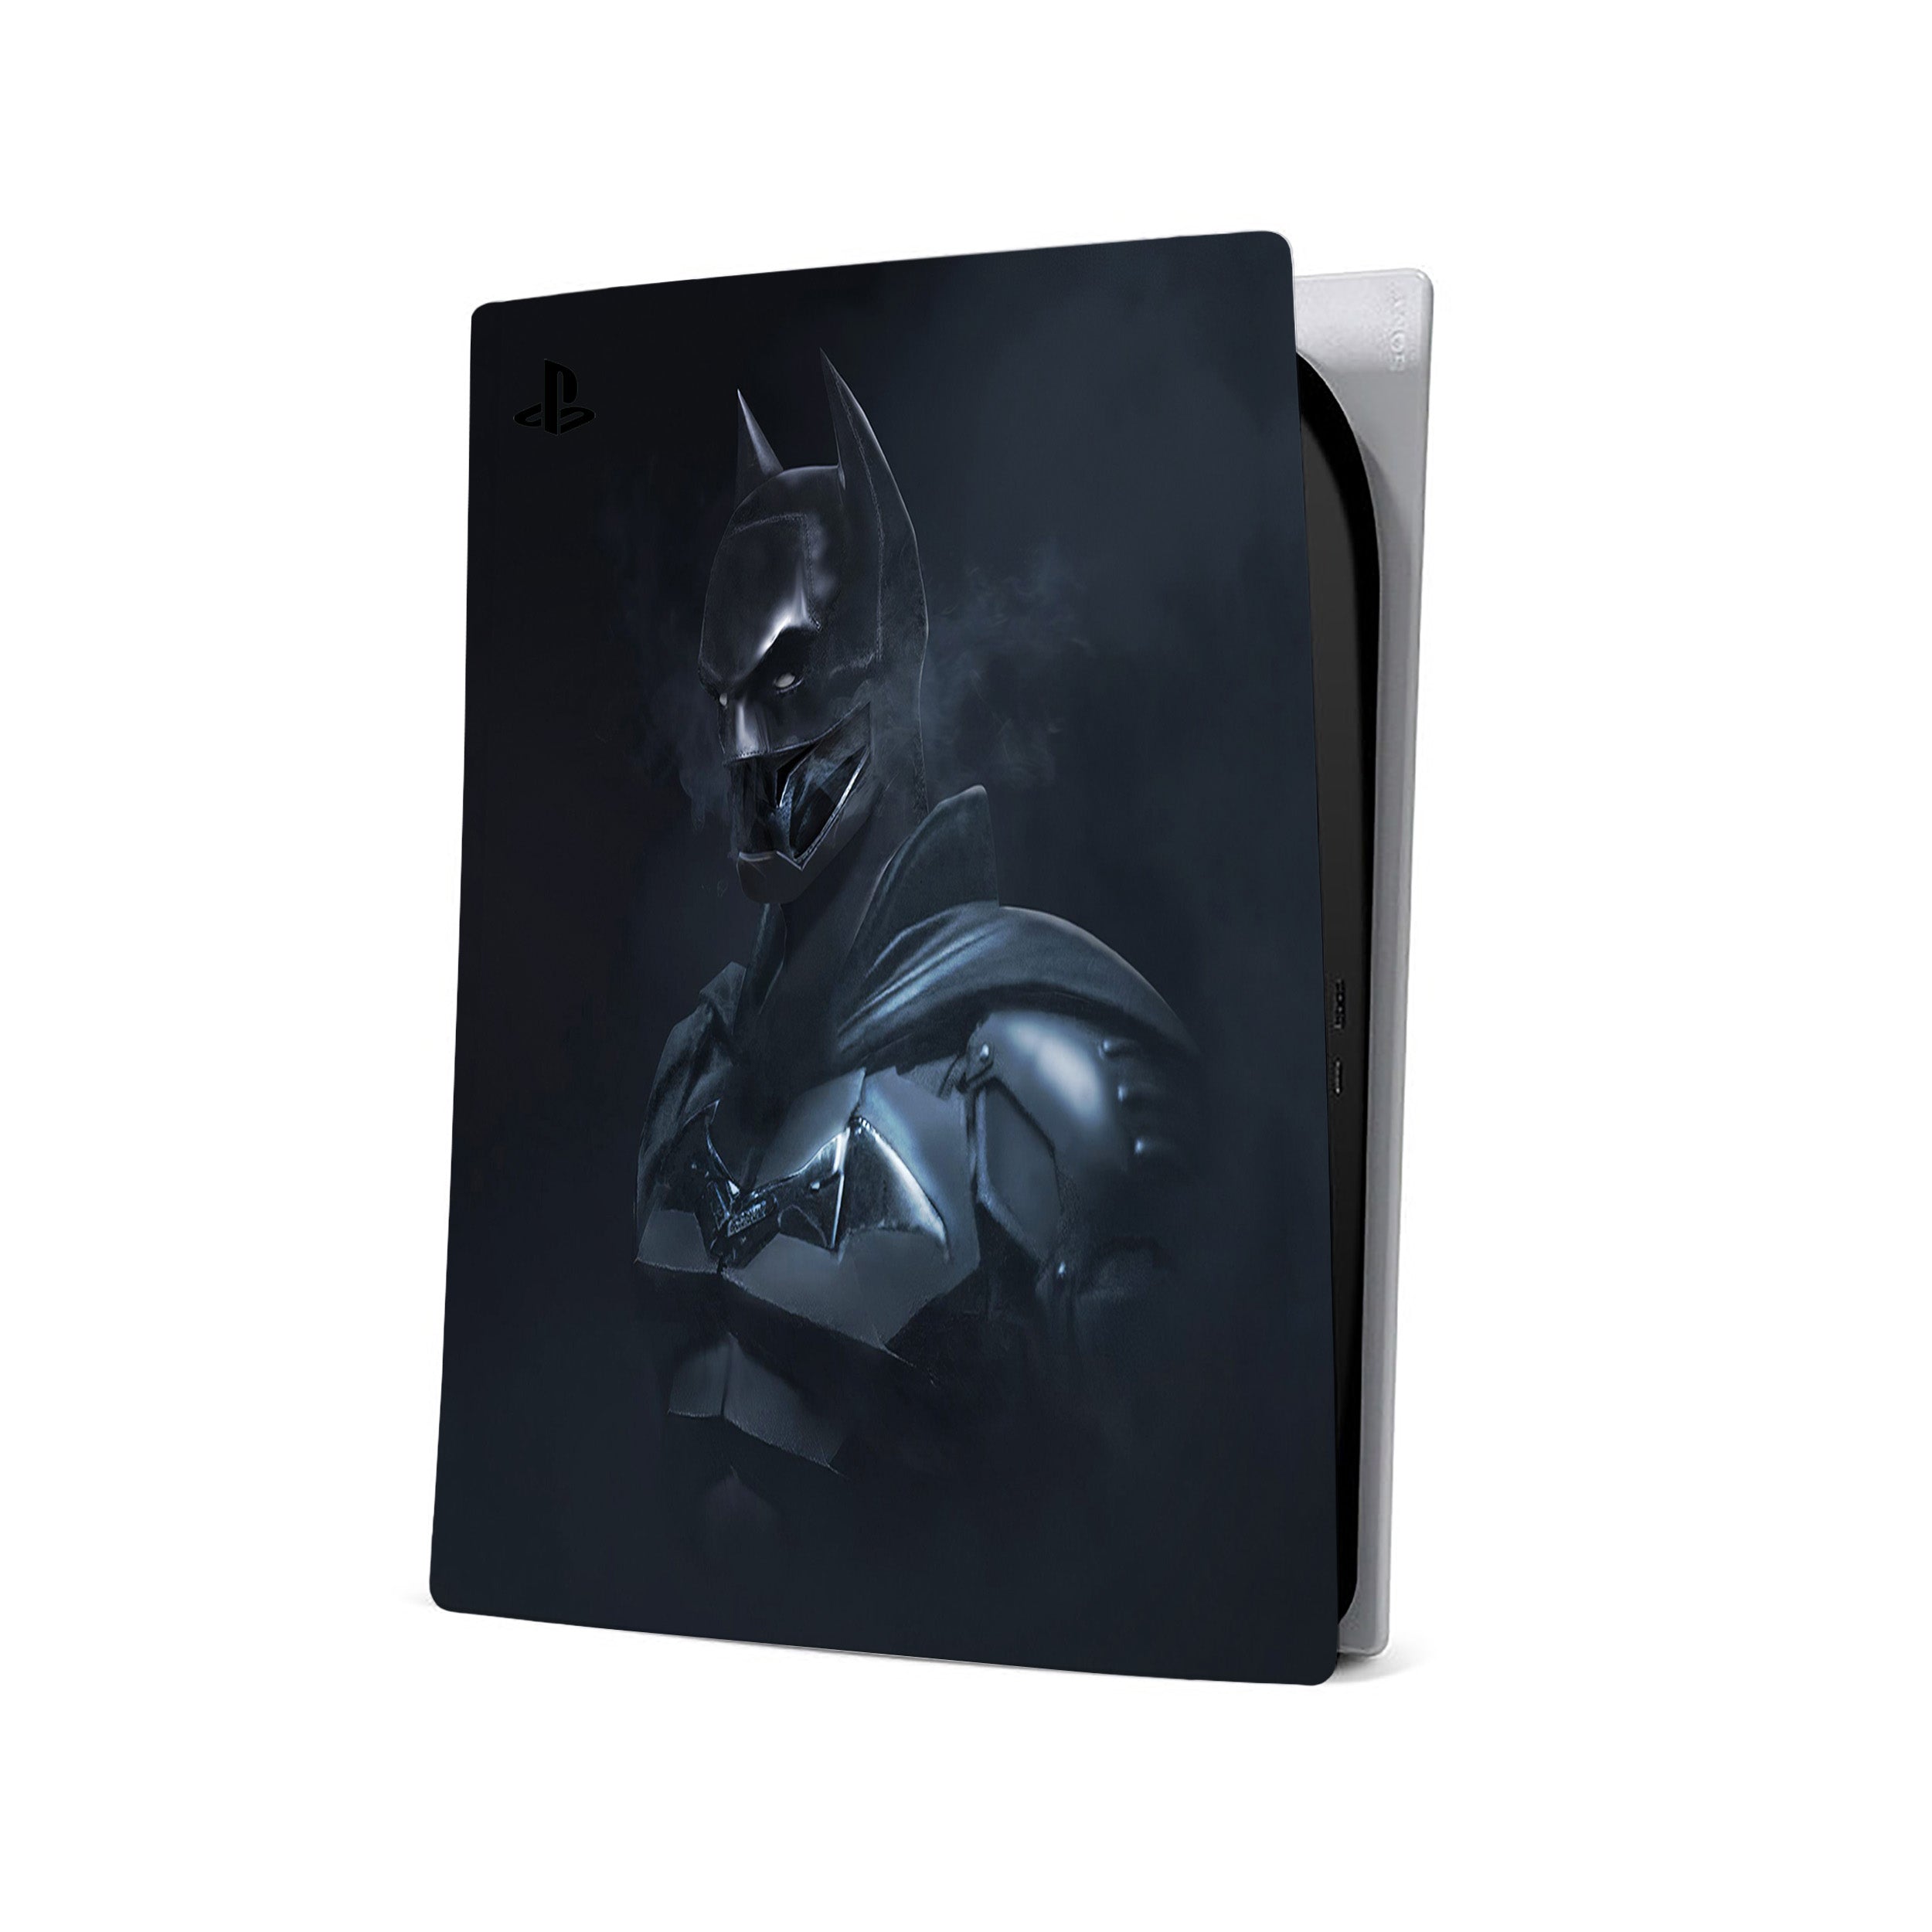 A video game skin featuring a DC Comics Batman design for the PS5.